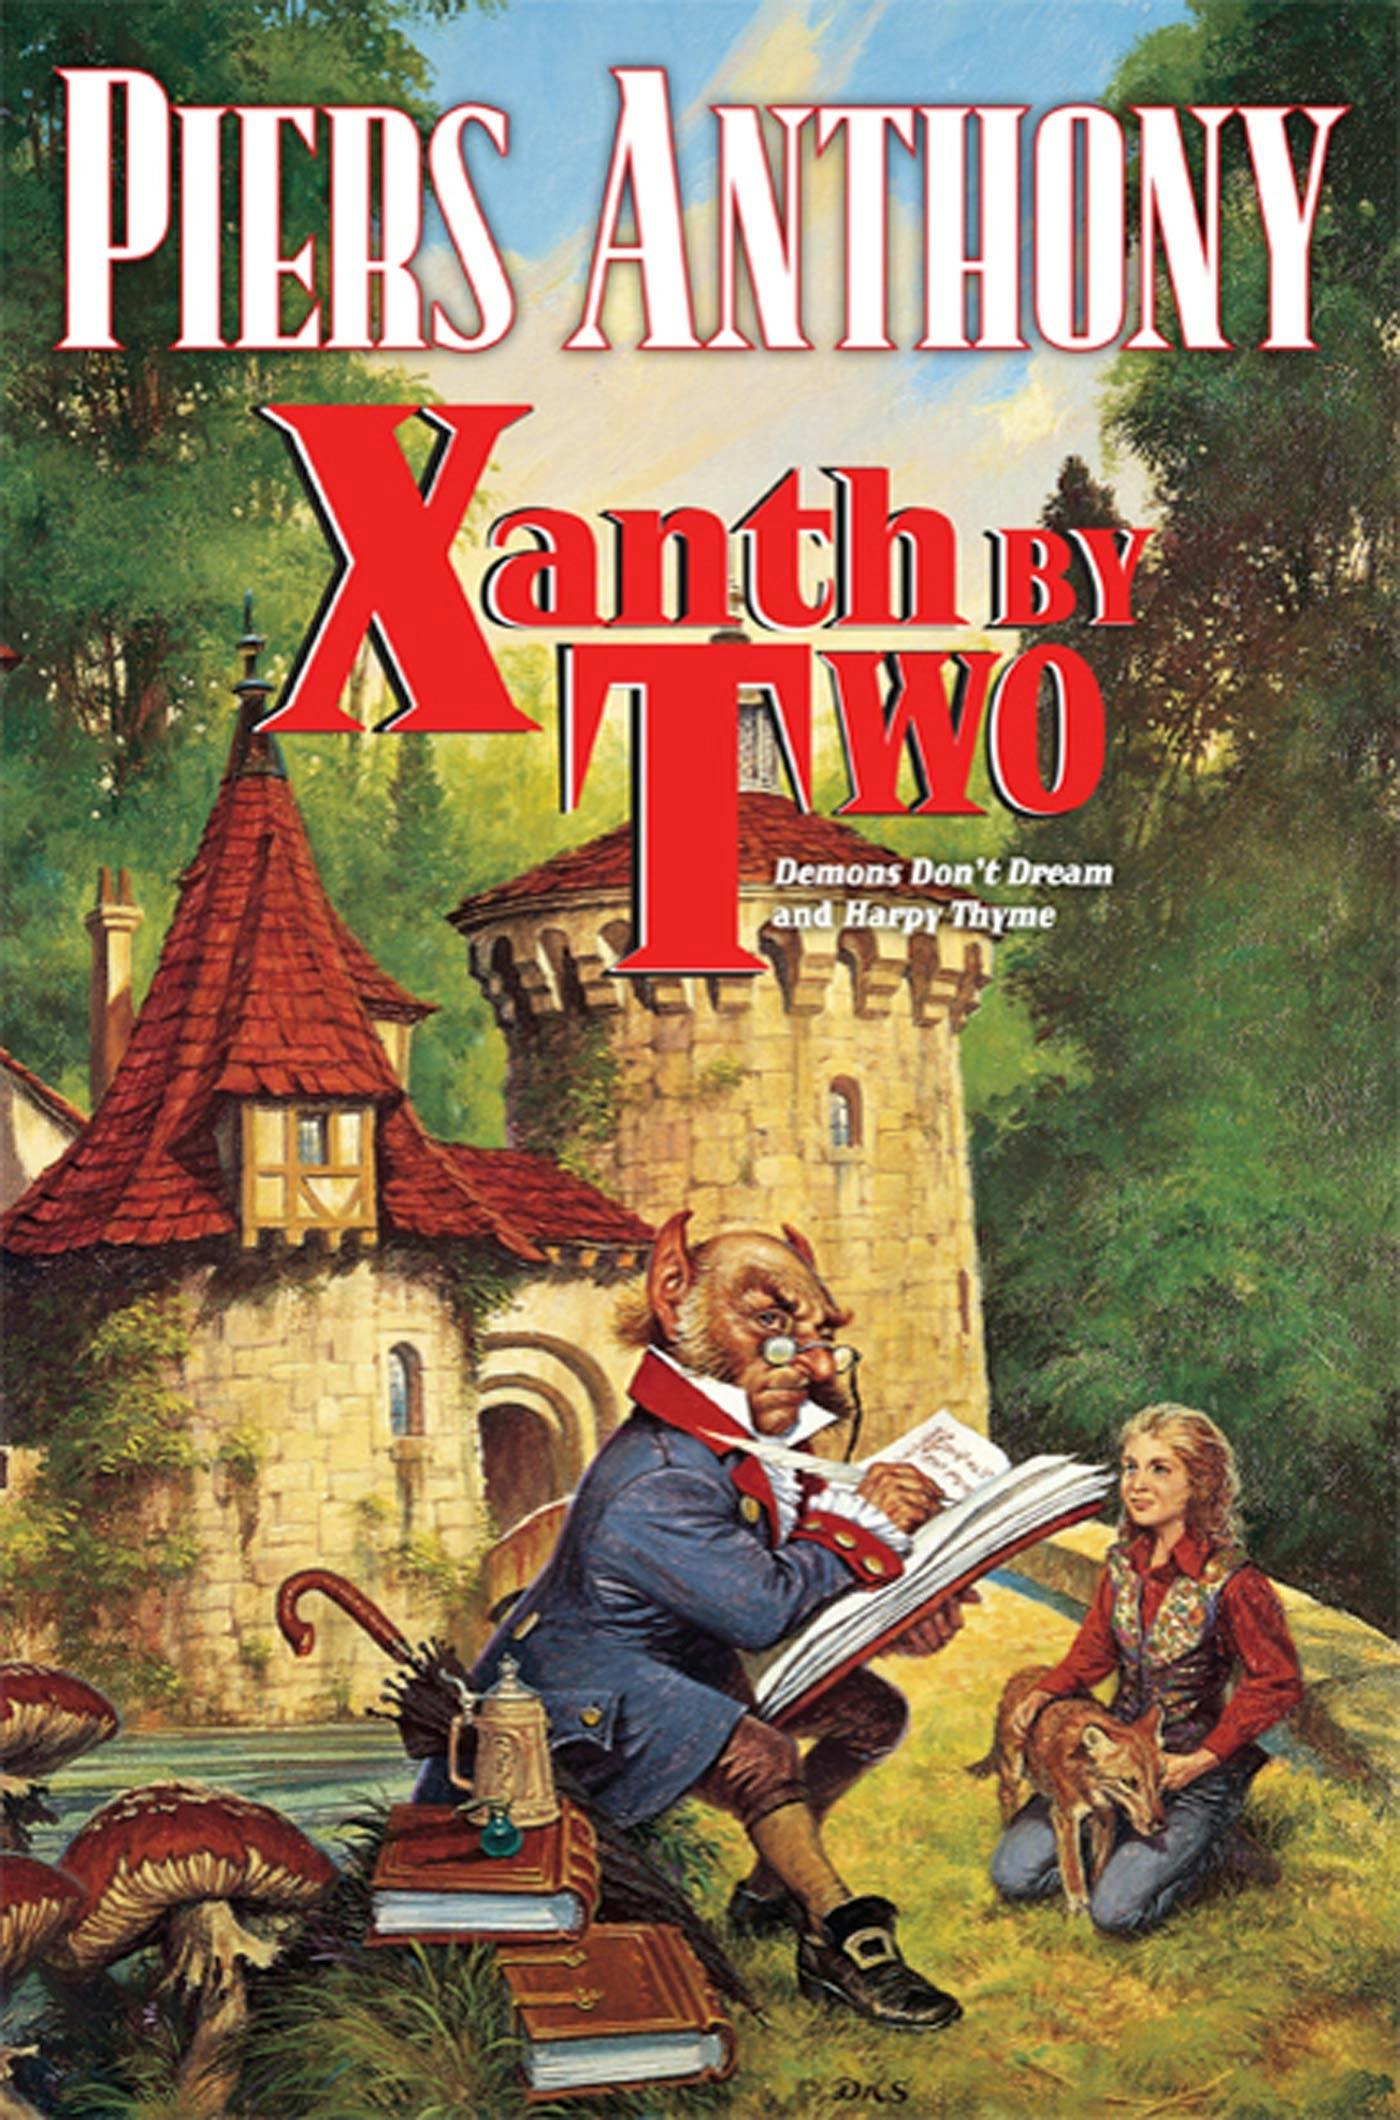 Cover for the book titled as: Xanth by Two